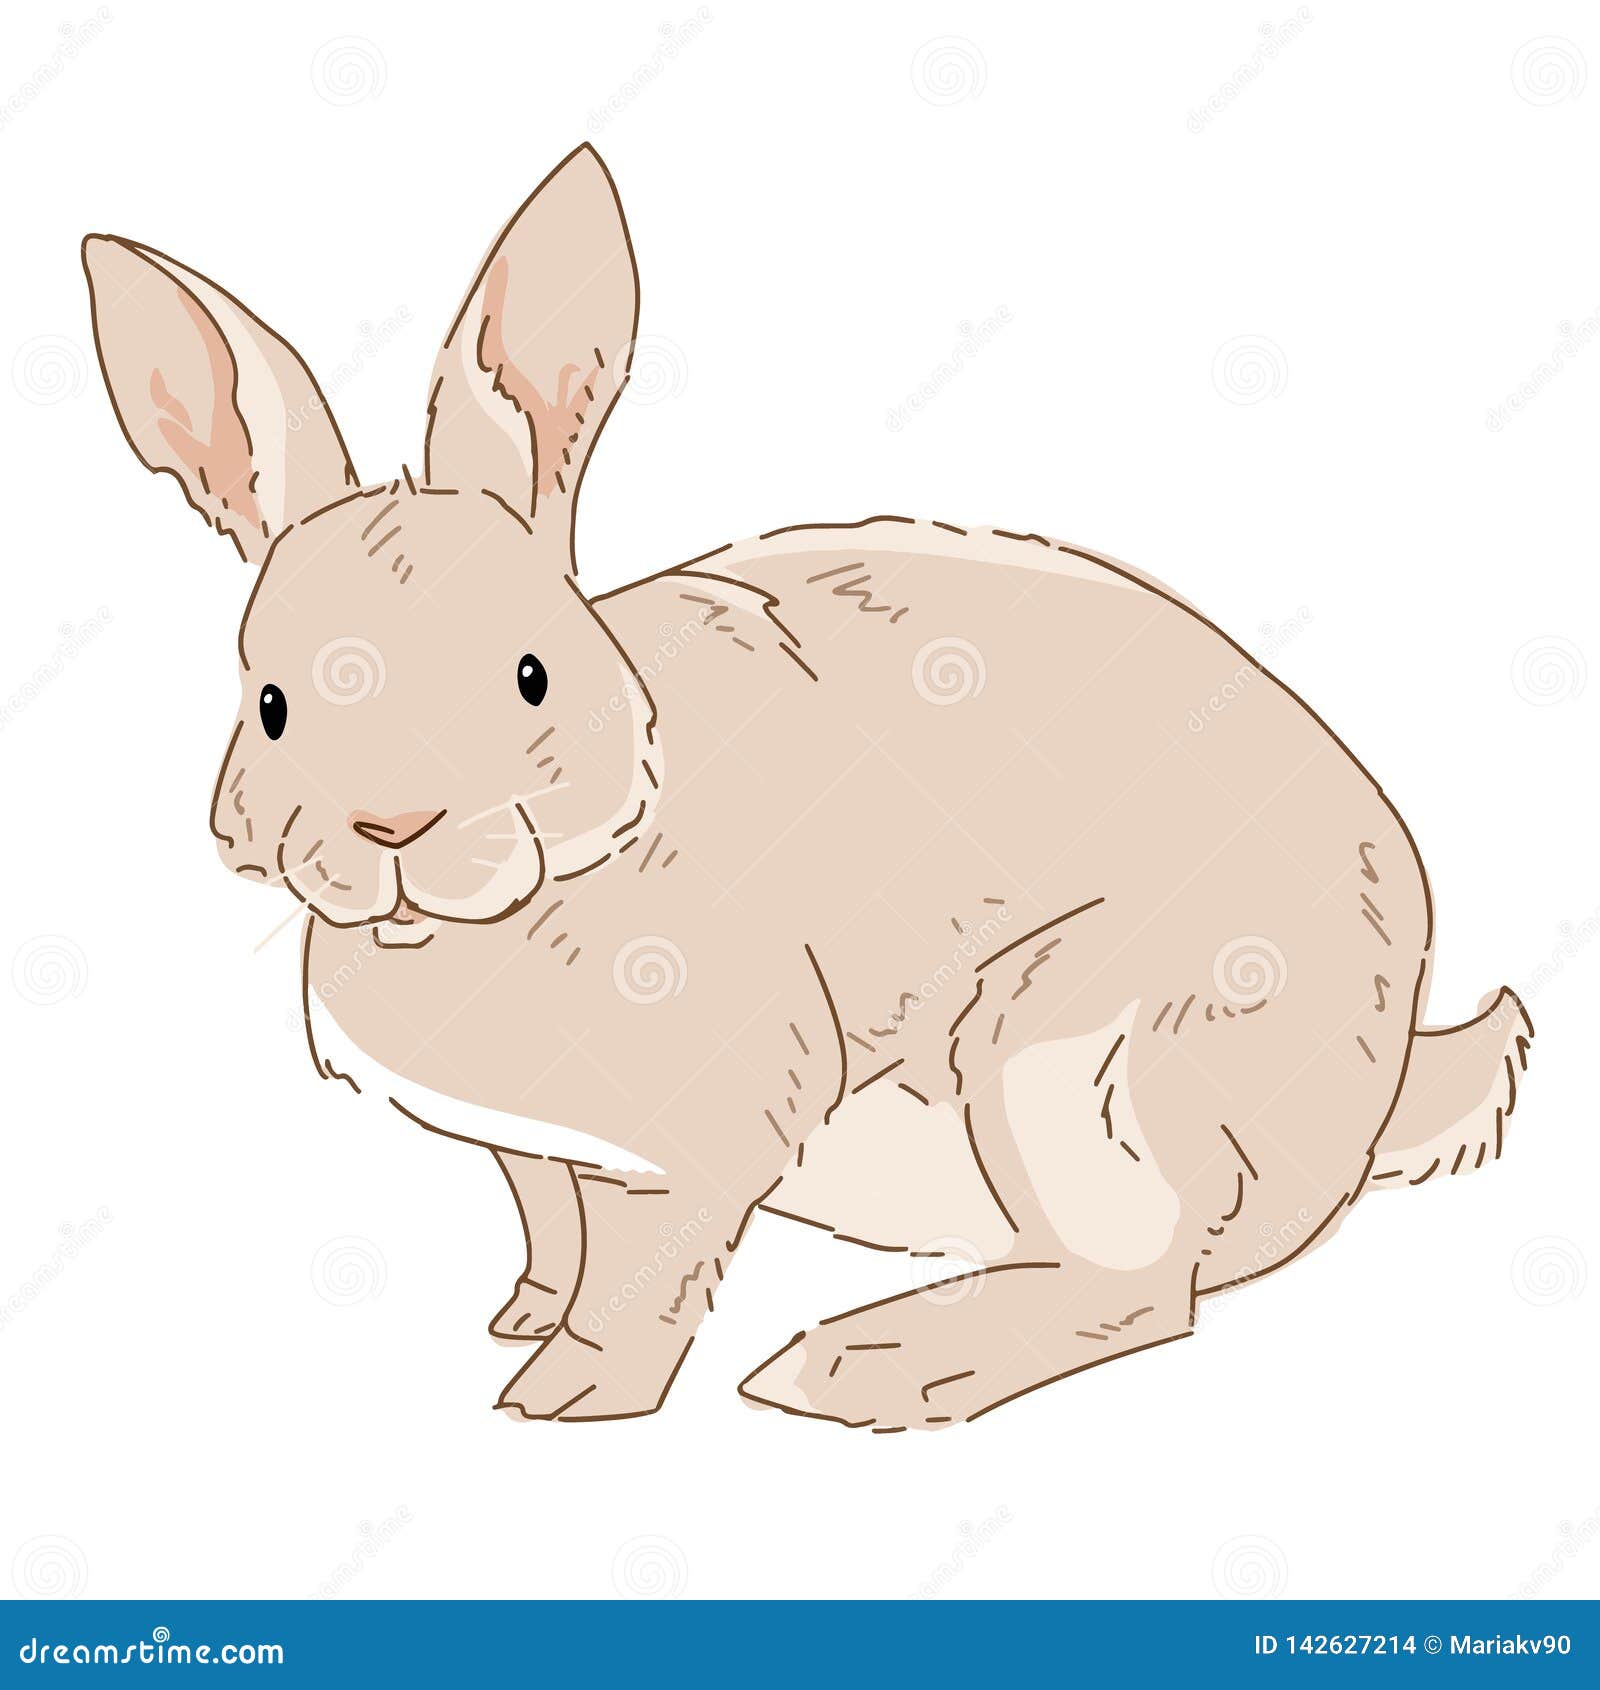 Vector Illustration Of Rabbit On White Background Drawn Bunny In Color Animal Clipart Drawn By Hand Stock Vector Illustration Of Domestic Furry 142627214